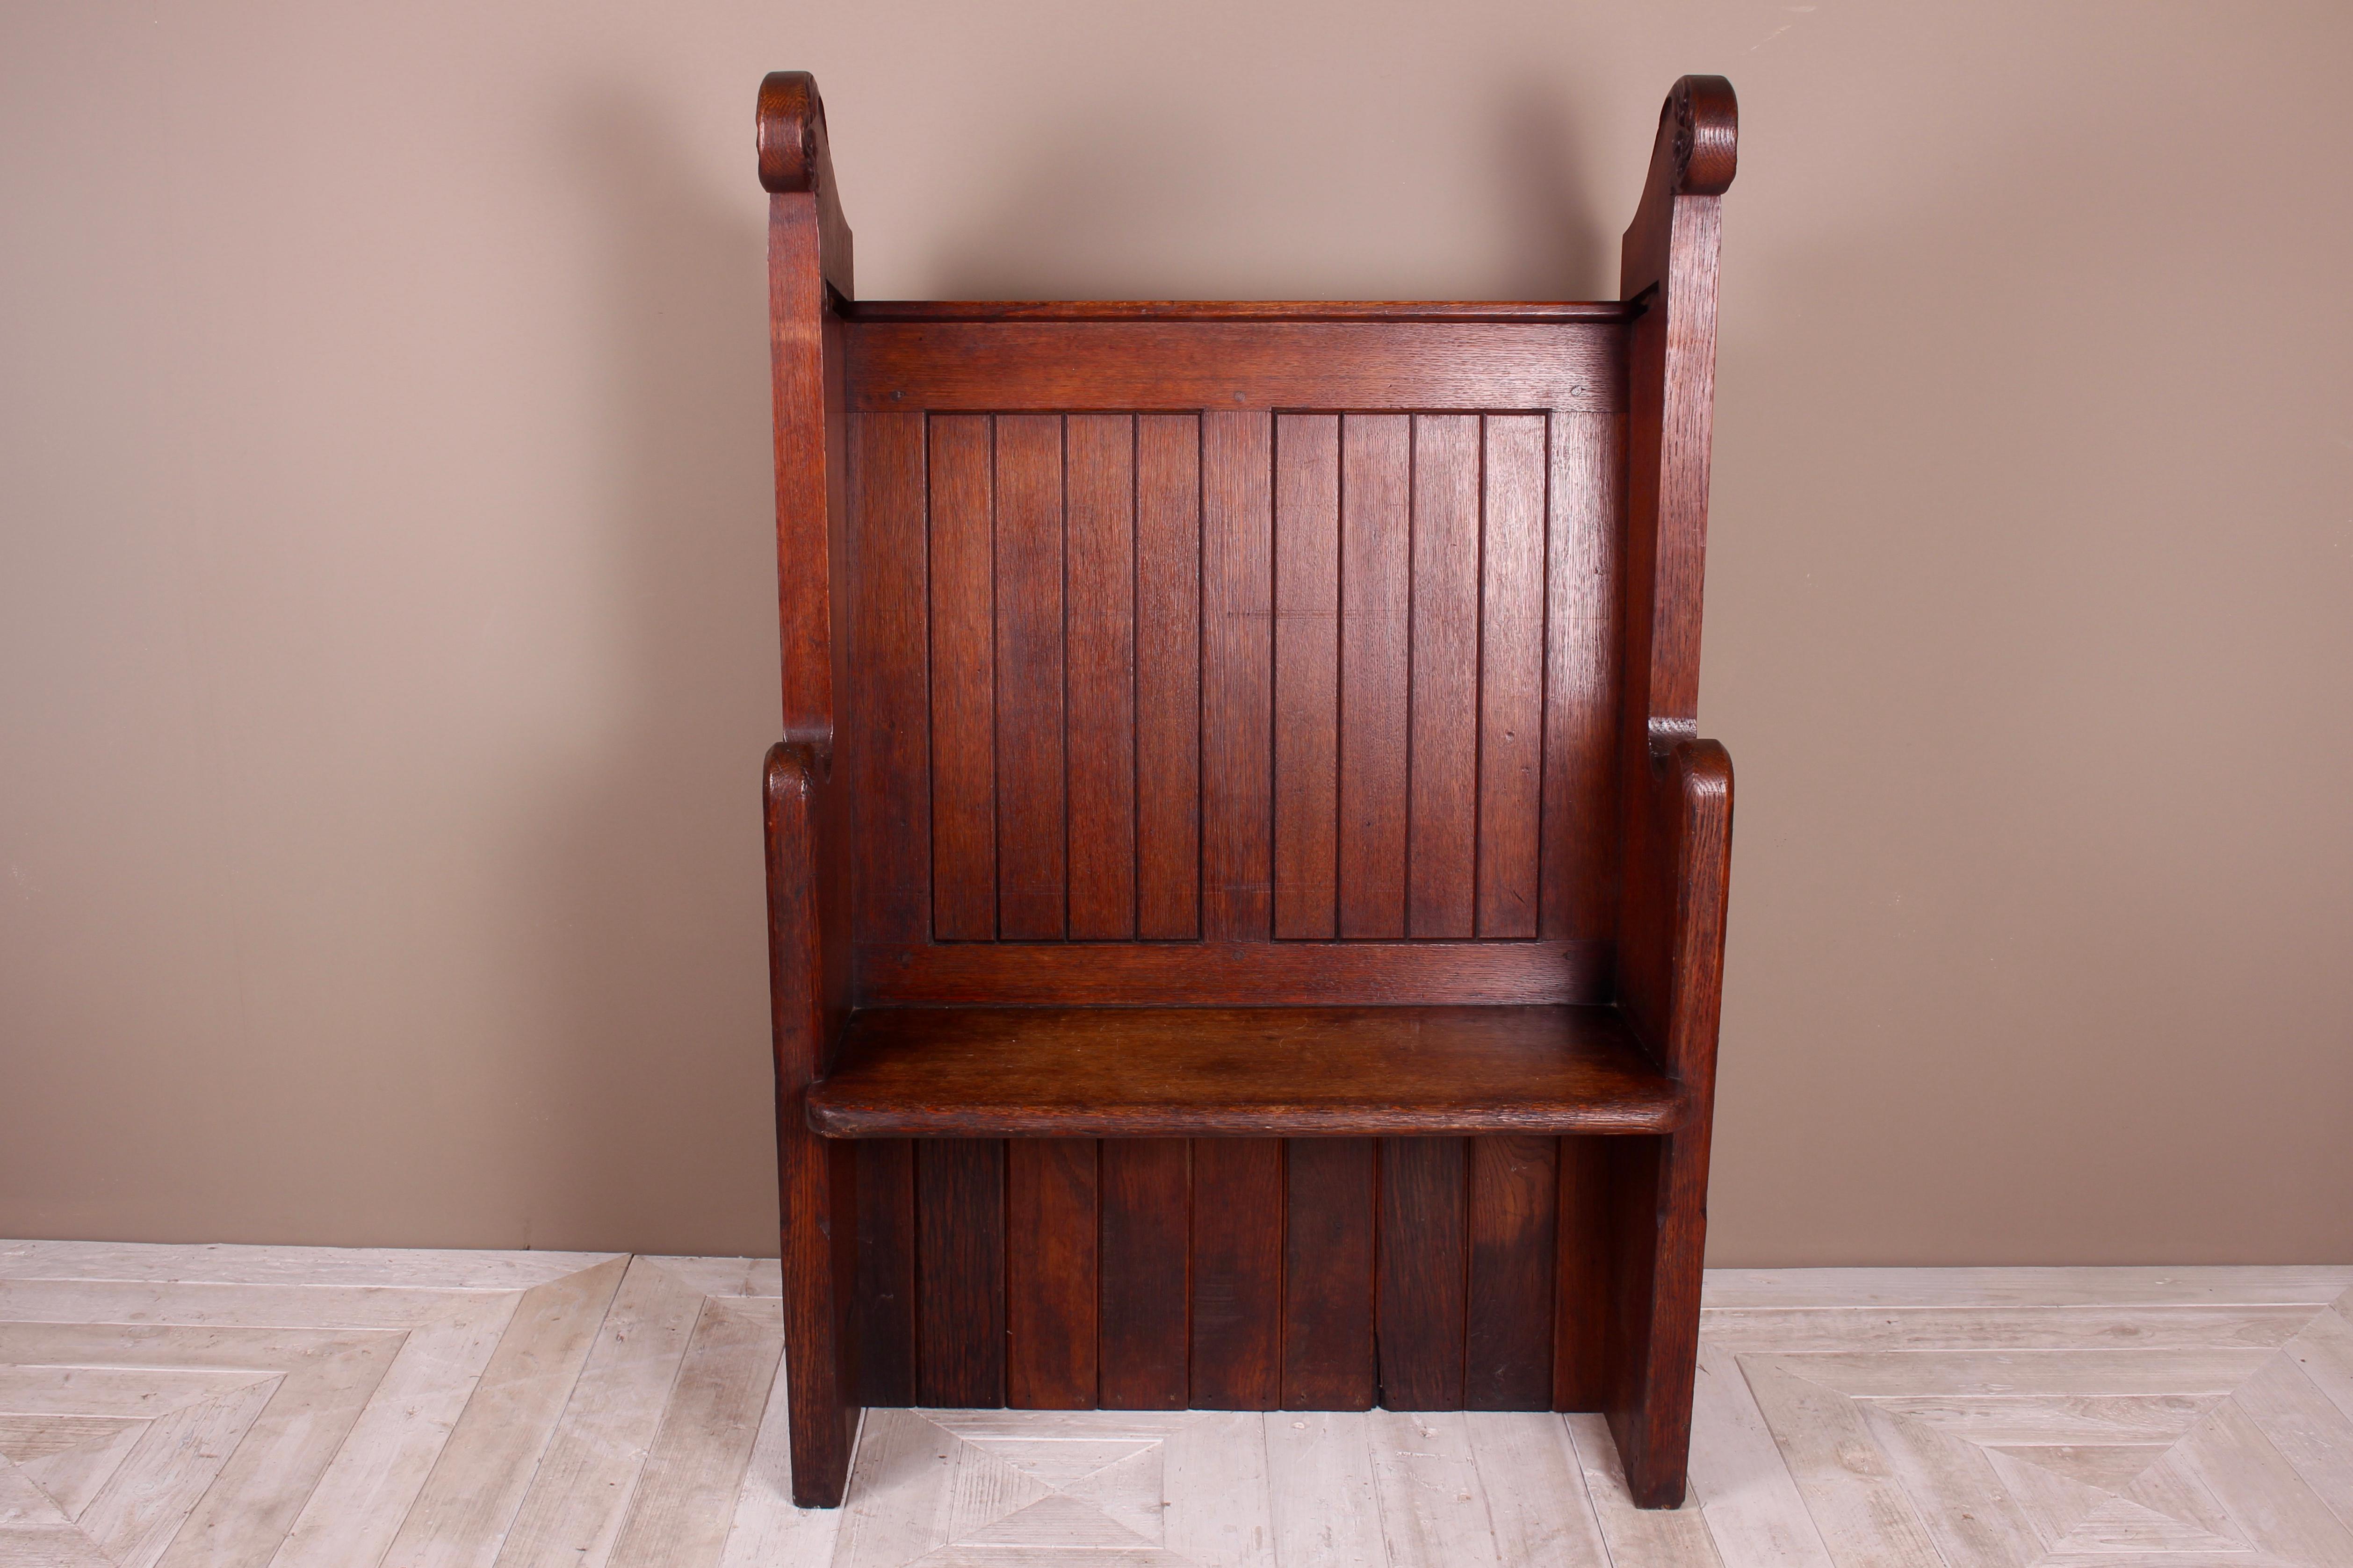 A lovely solid oak hall seat in the Gothic taste. Tongue and groove seat back flanked with nicely carved pew ends with church window tracery, topped with carved floral scrolls.